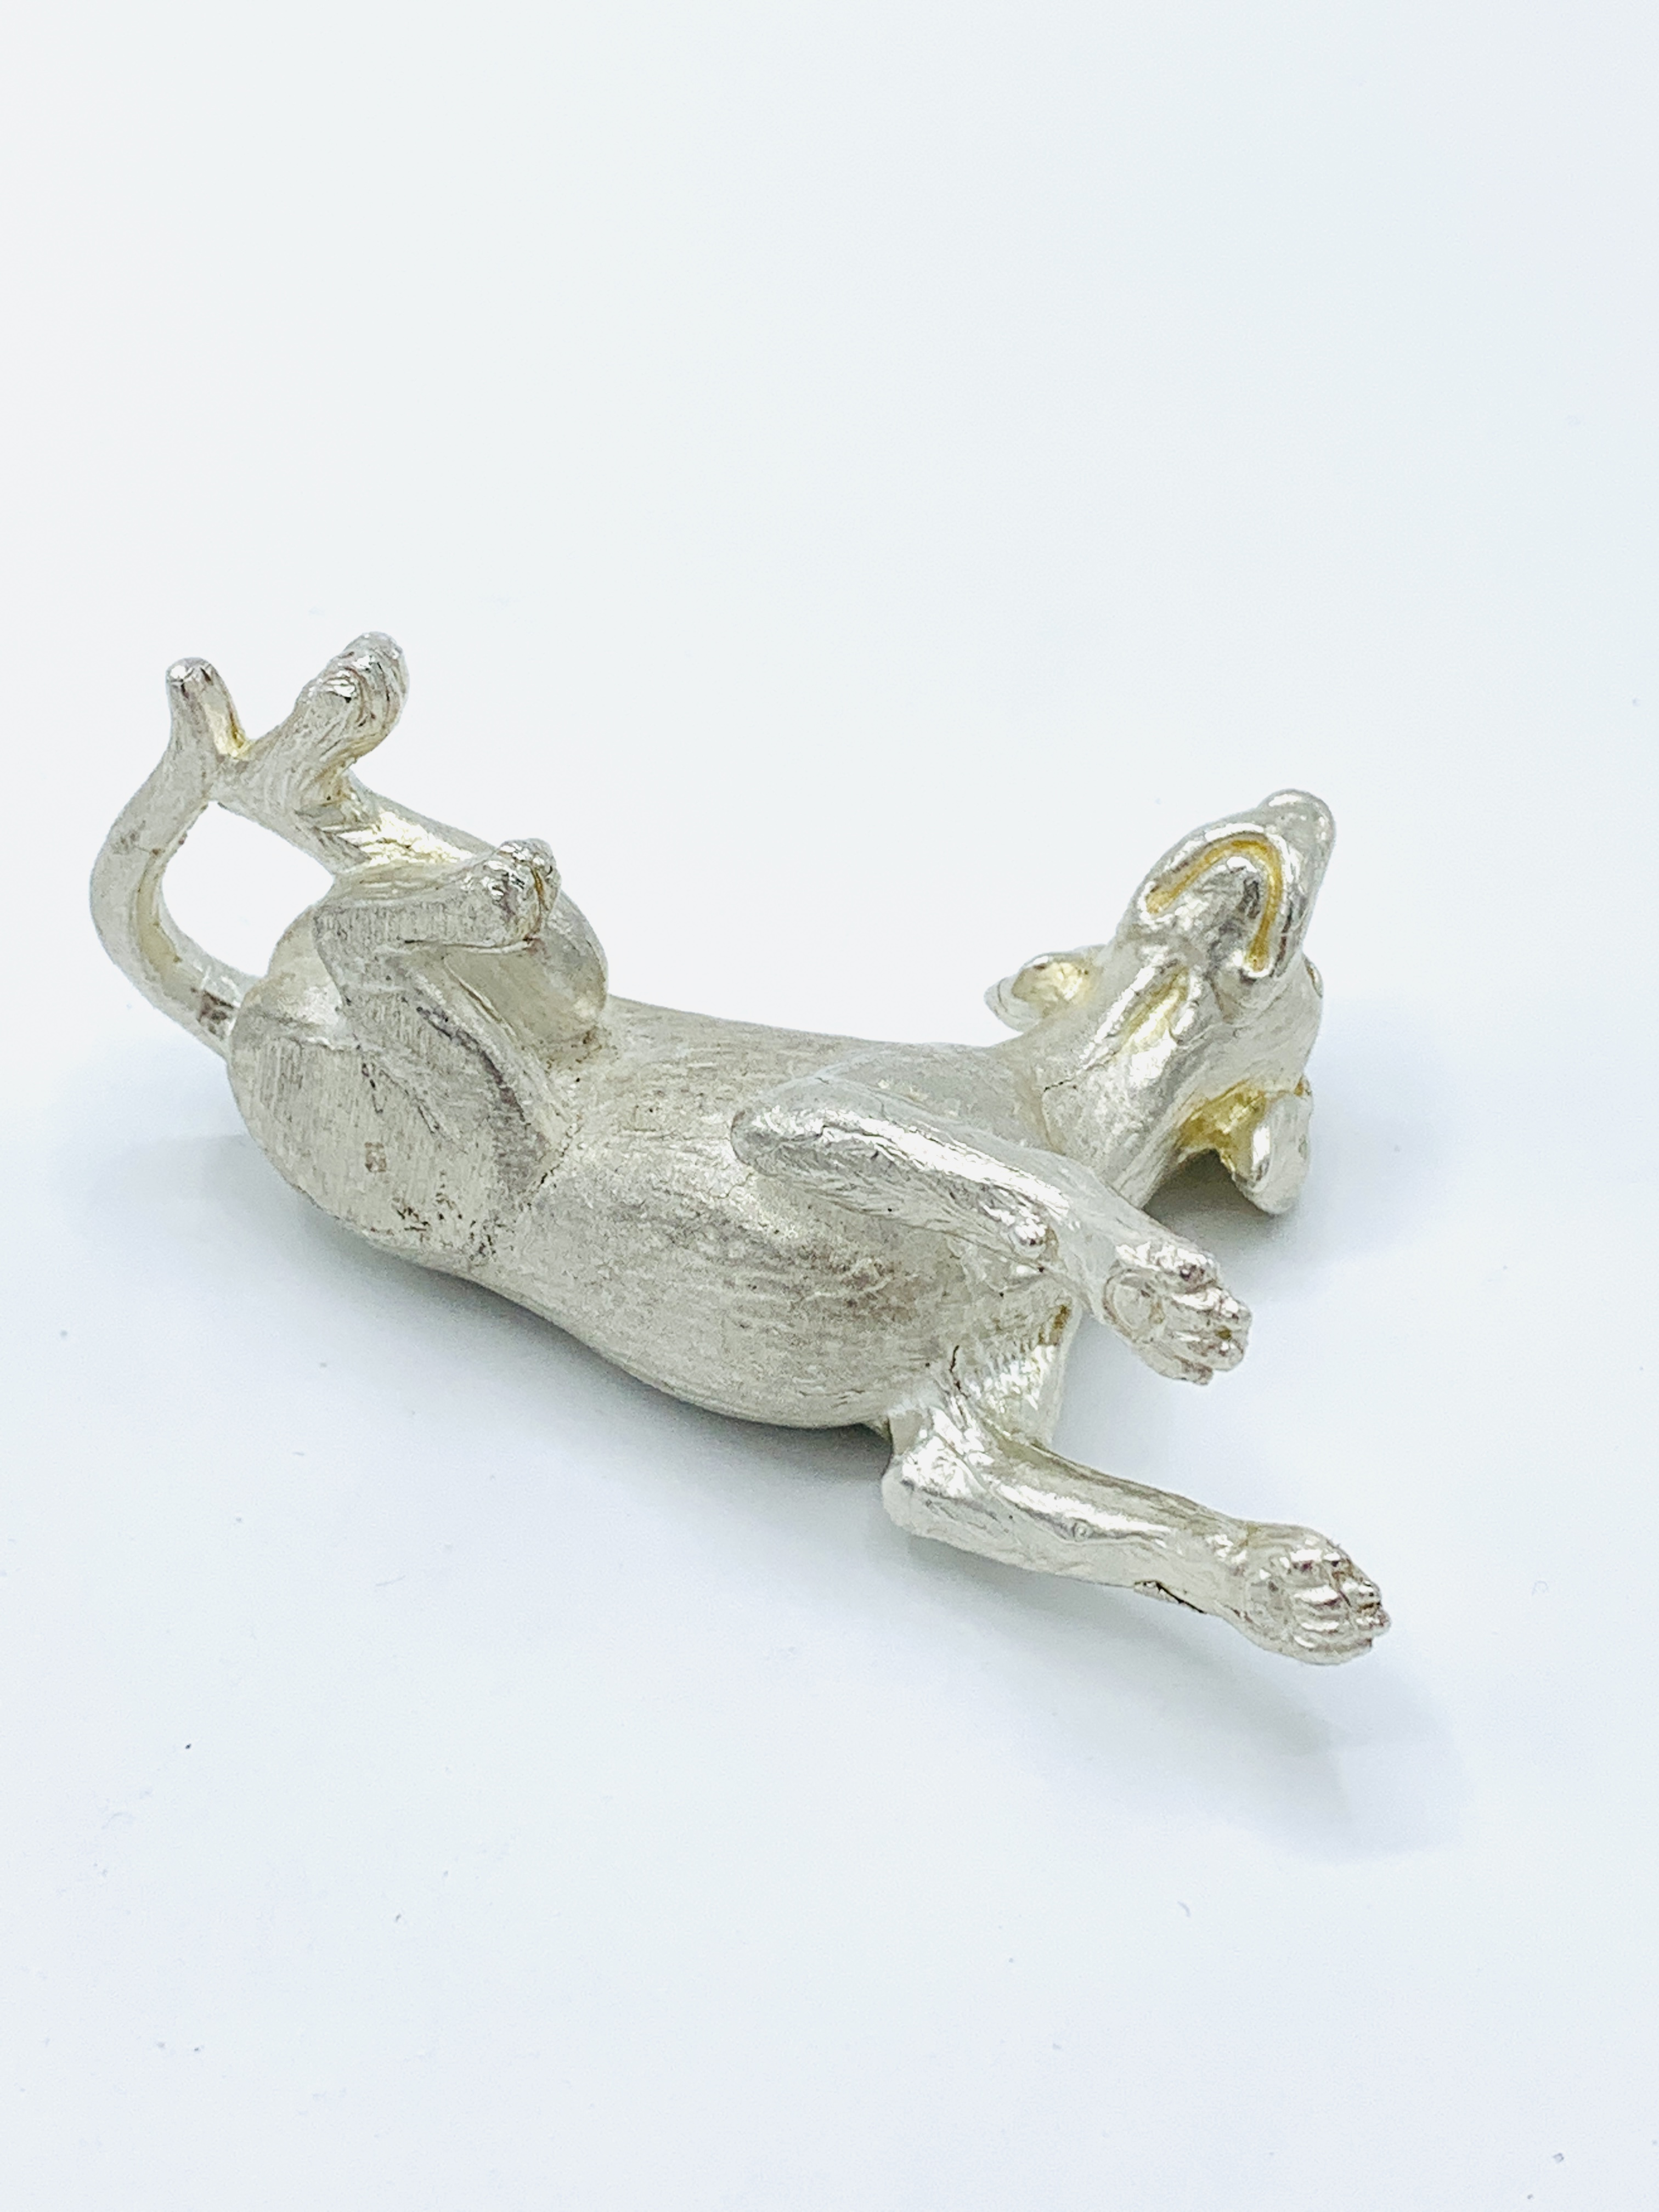 Silver dog sculpture. - Image 4 of 4